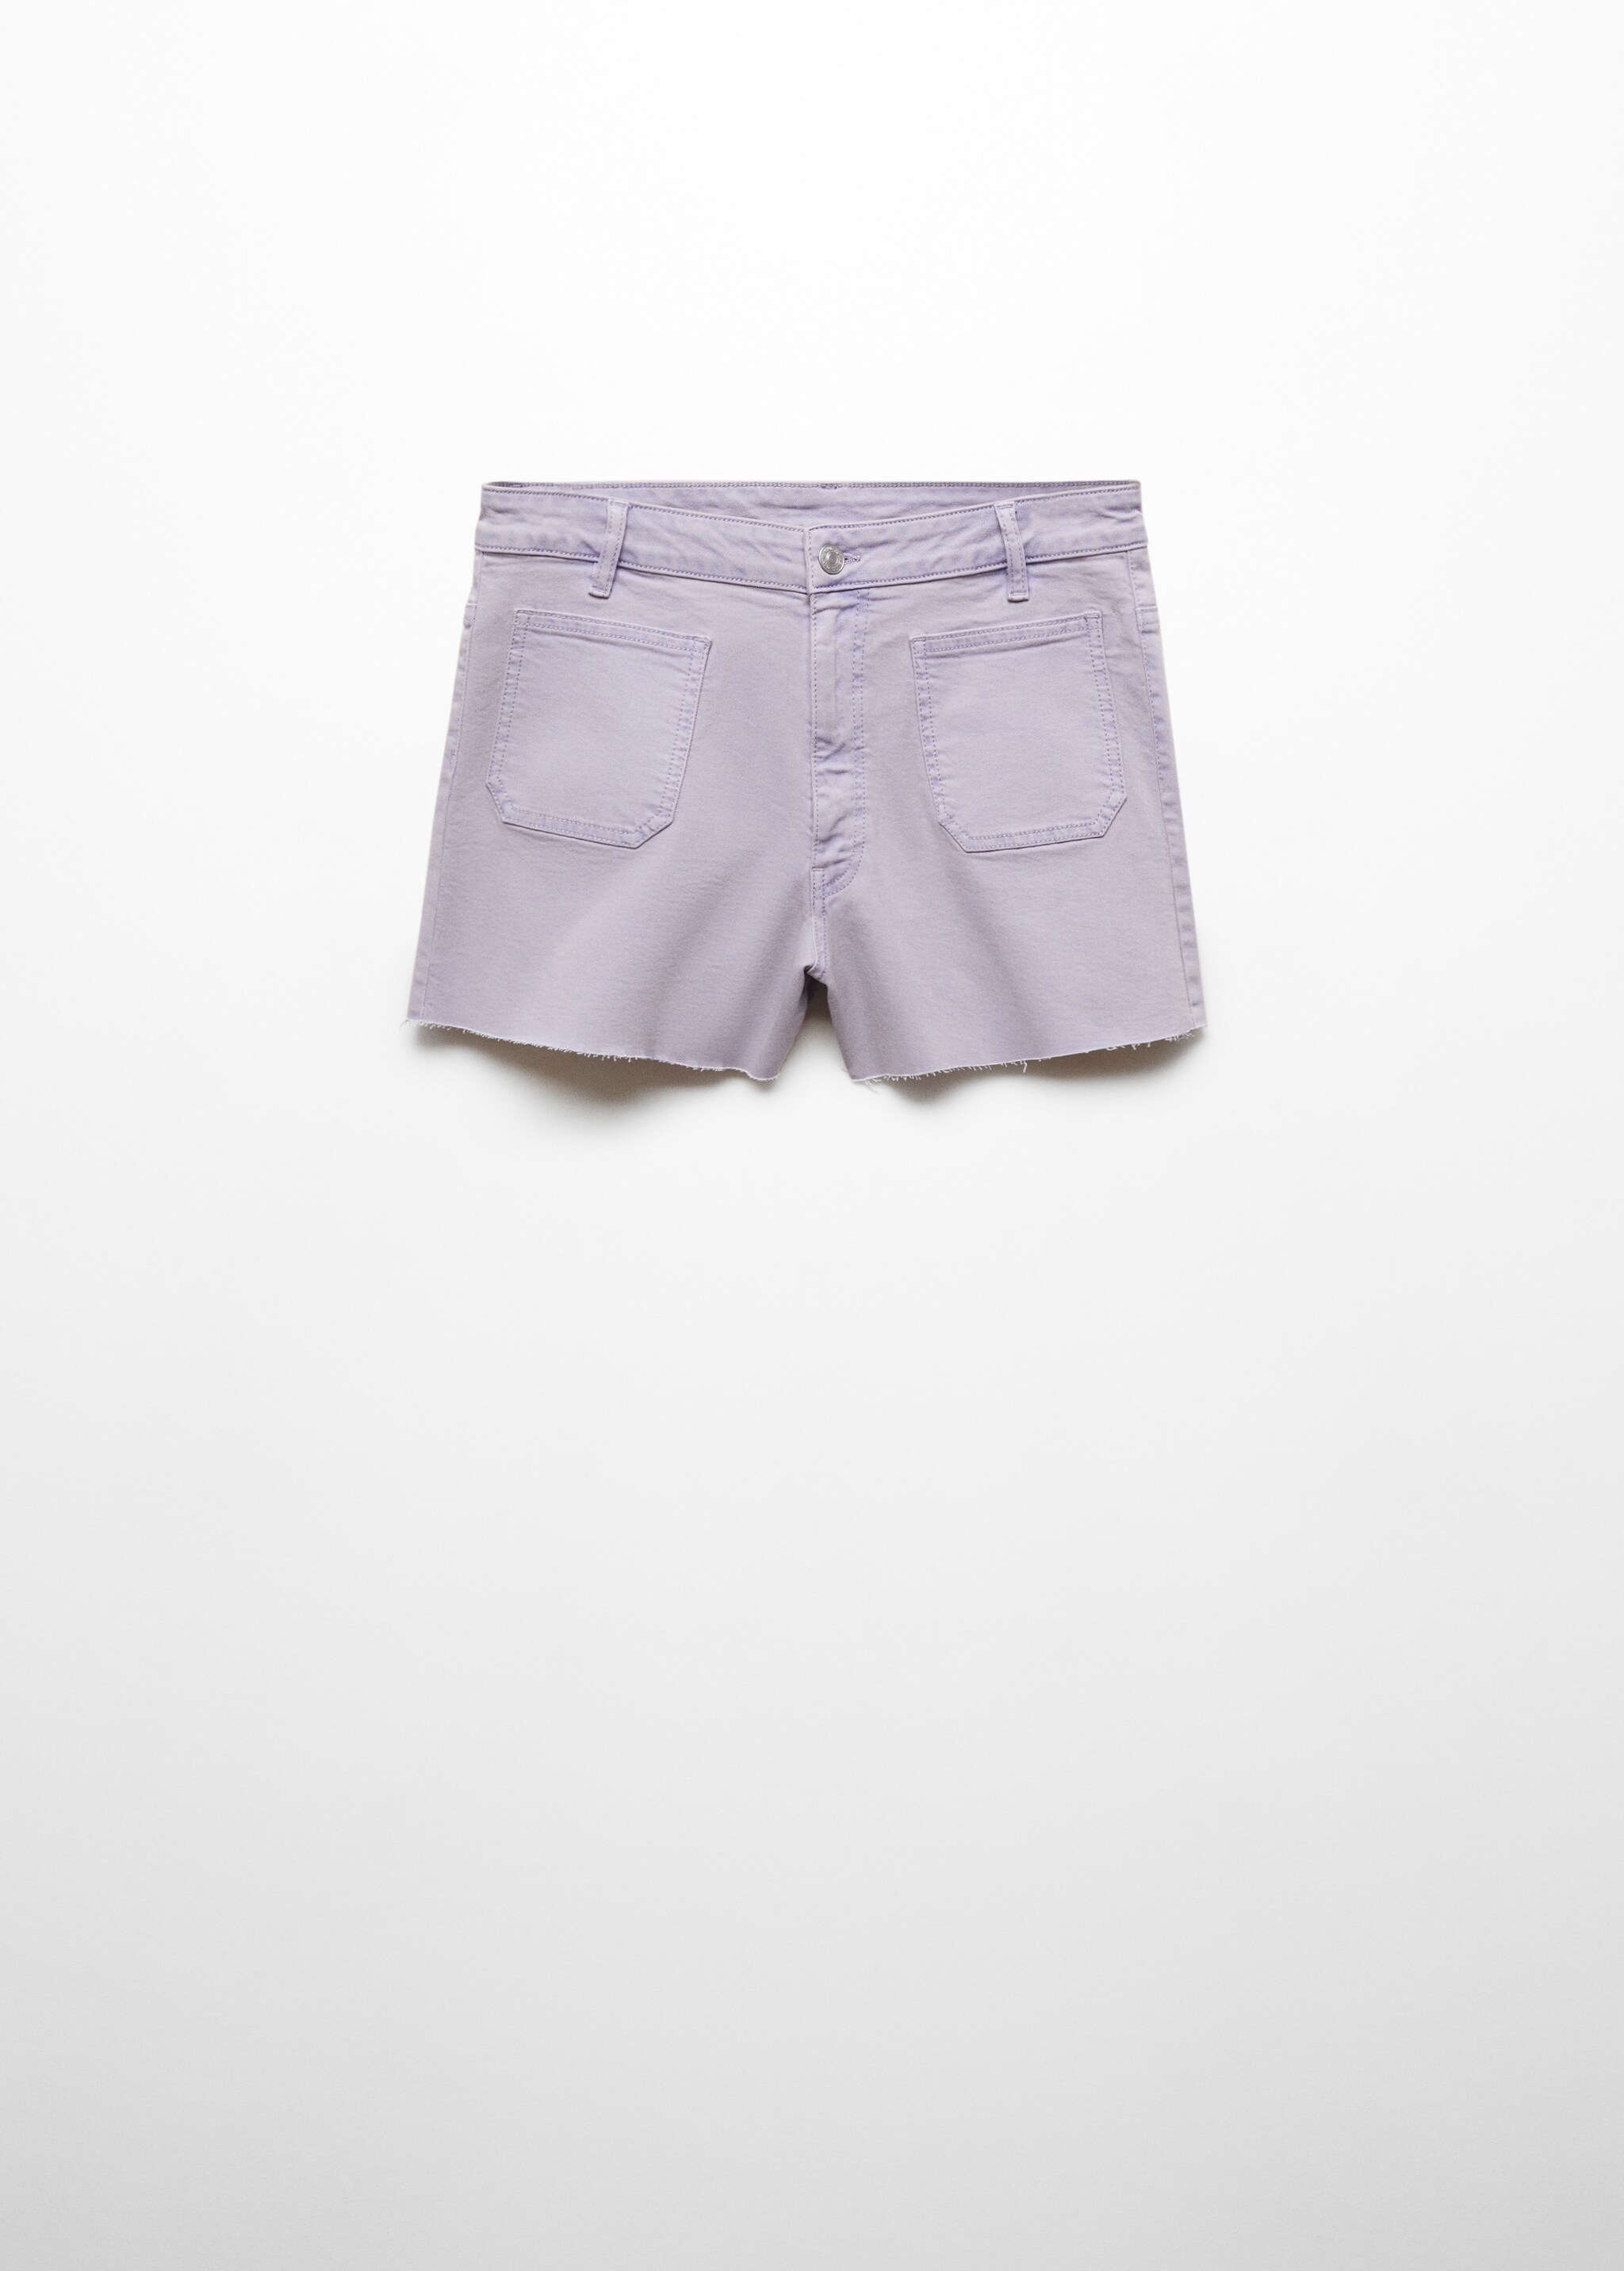 Cotton shorts with pockets - Article without model